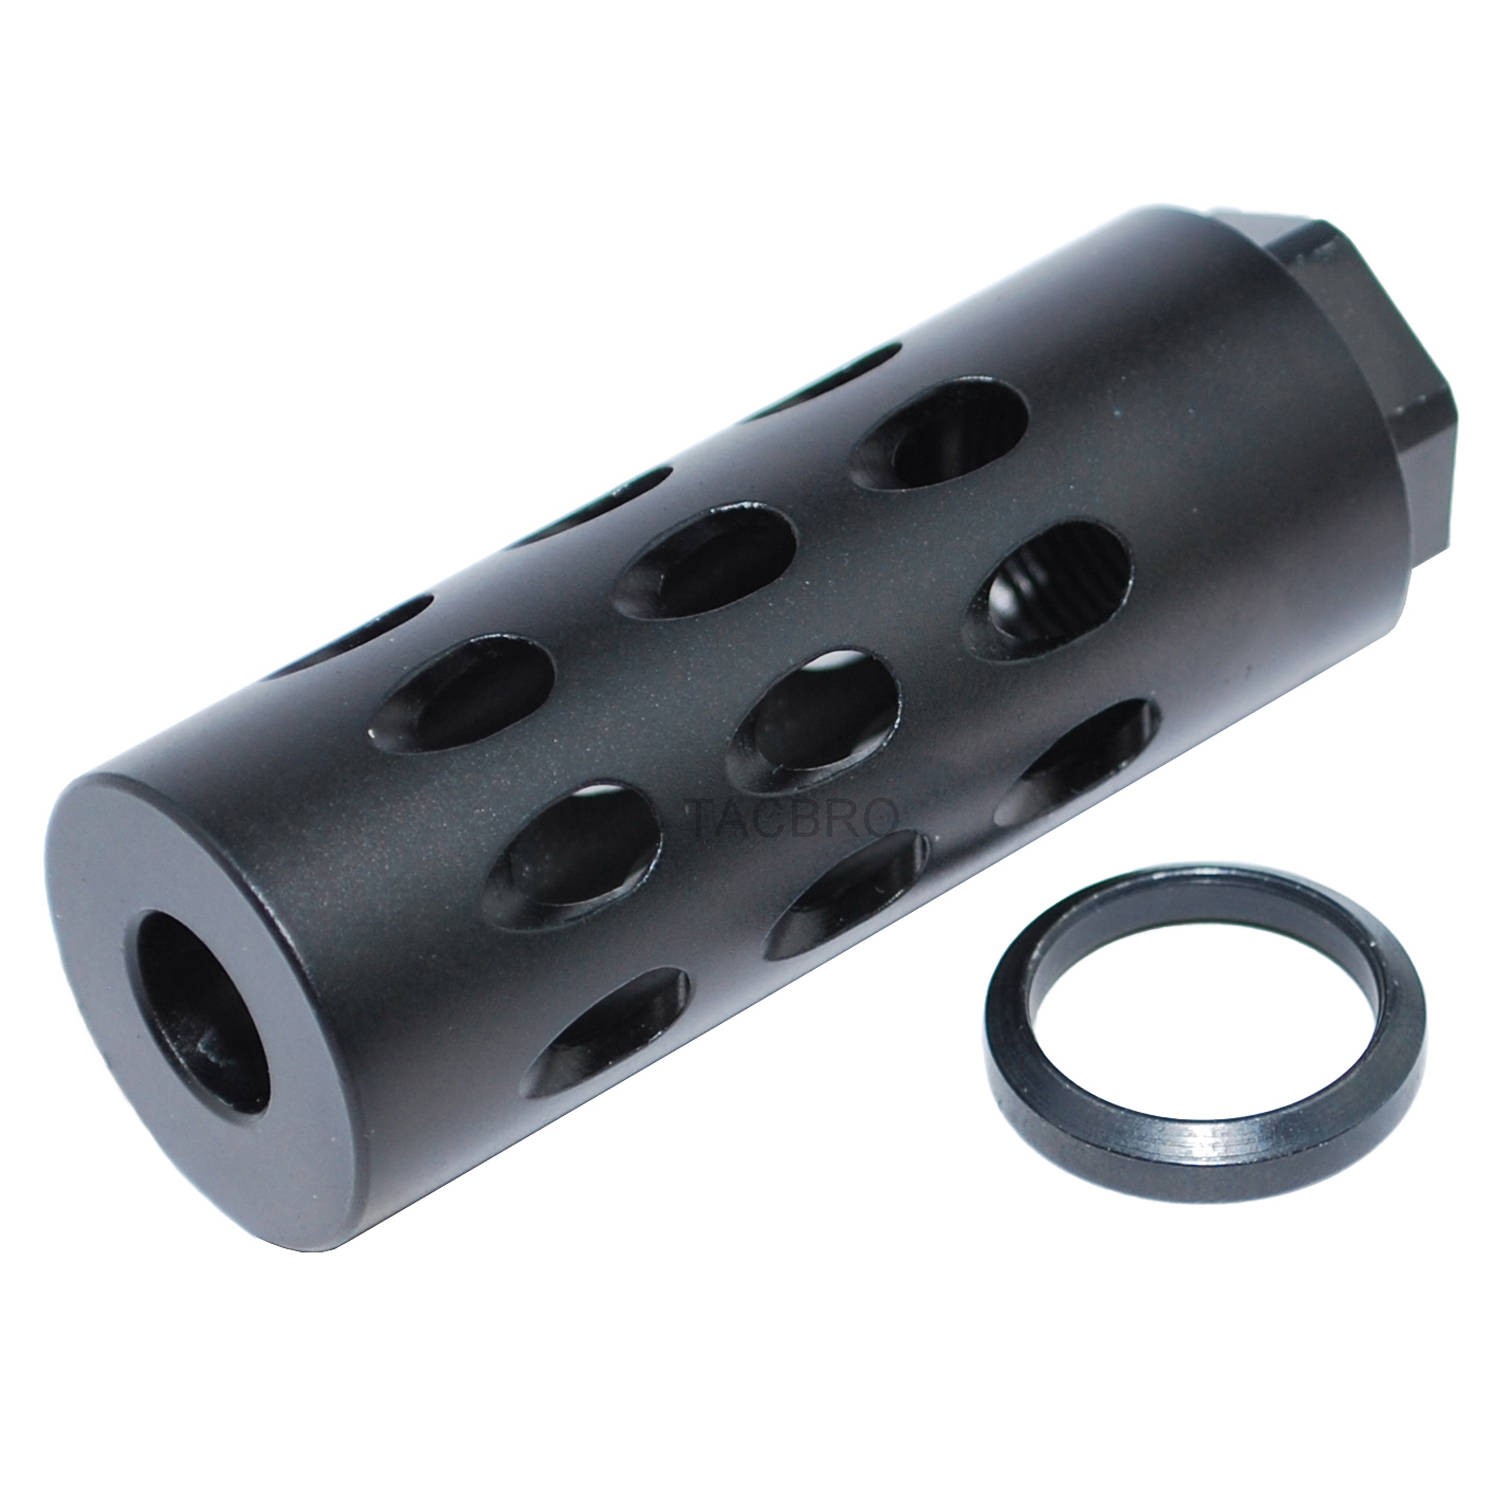 6.5 Grendel Tanker Style Competition Muzzle Brake 9/16x24 TPI Threaded W Washer 